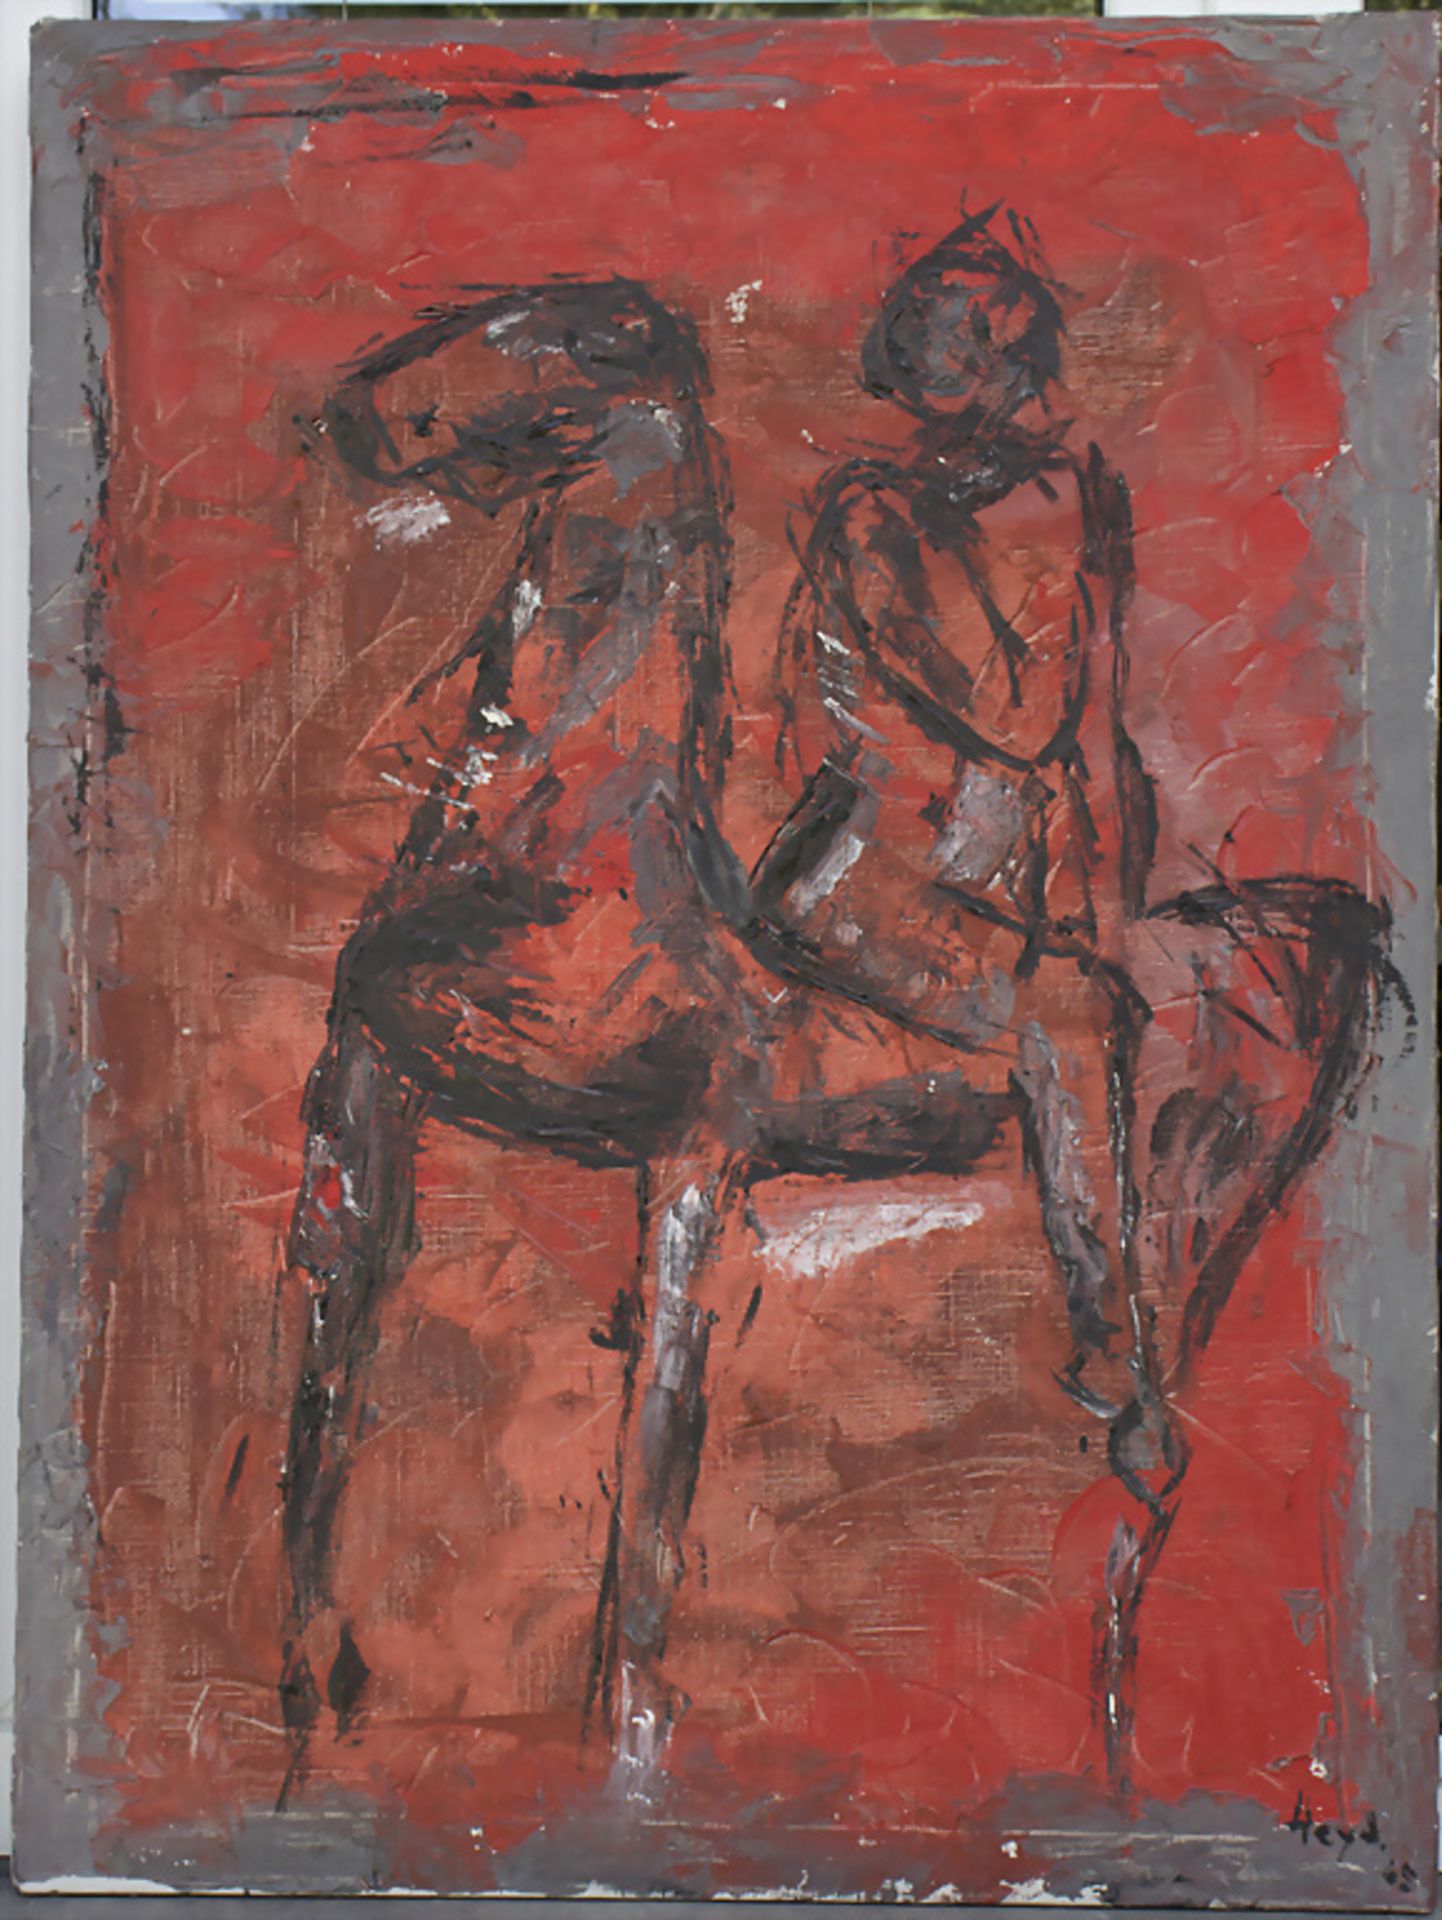 Eberhard Heyd, 'Roter Reiter' / 'Red rider', 1965